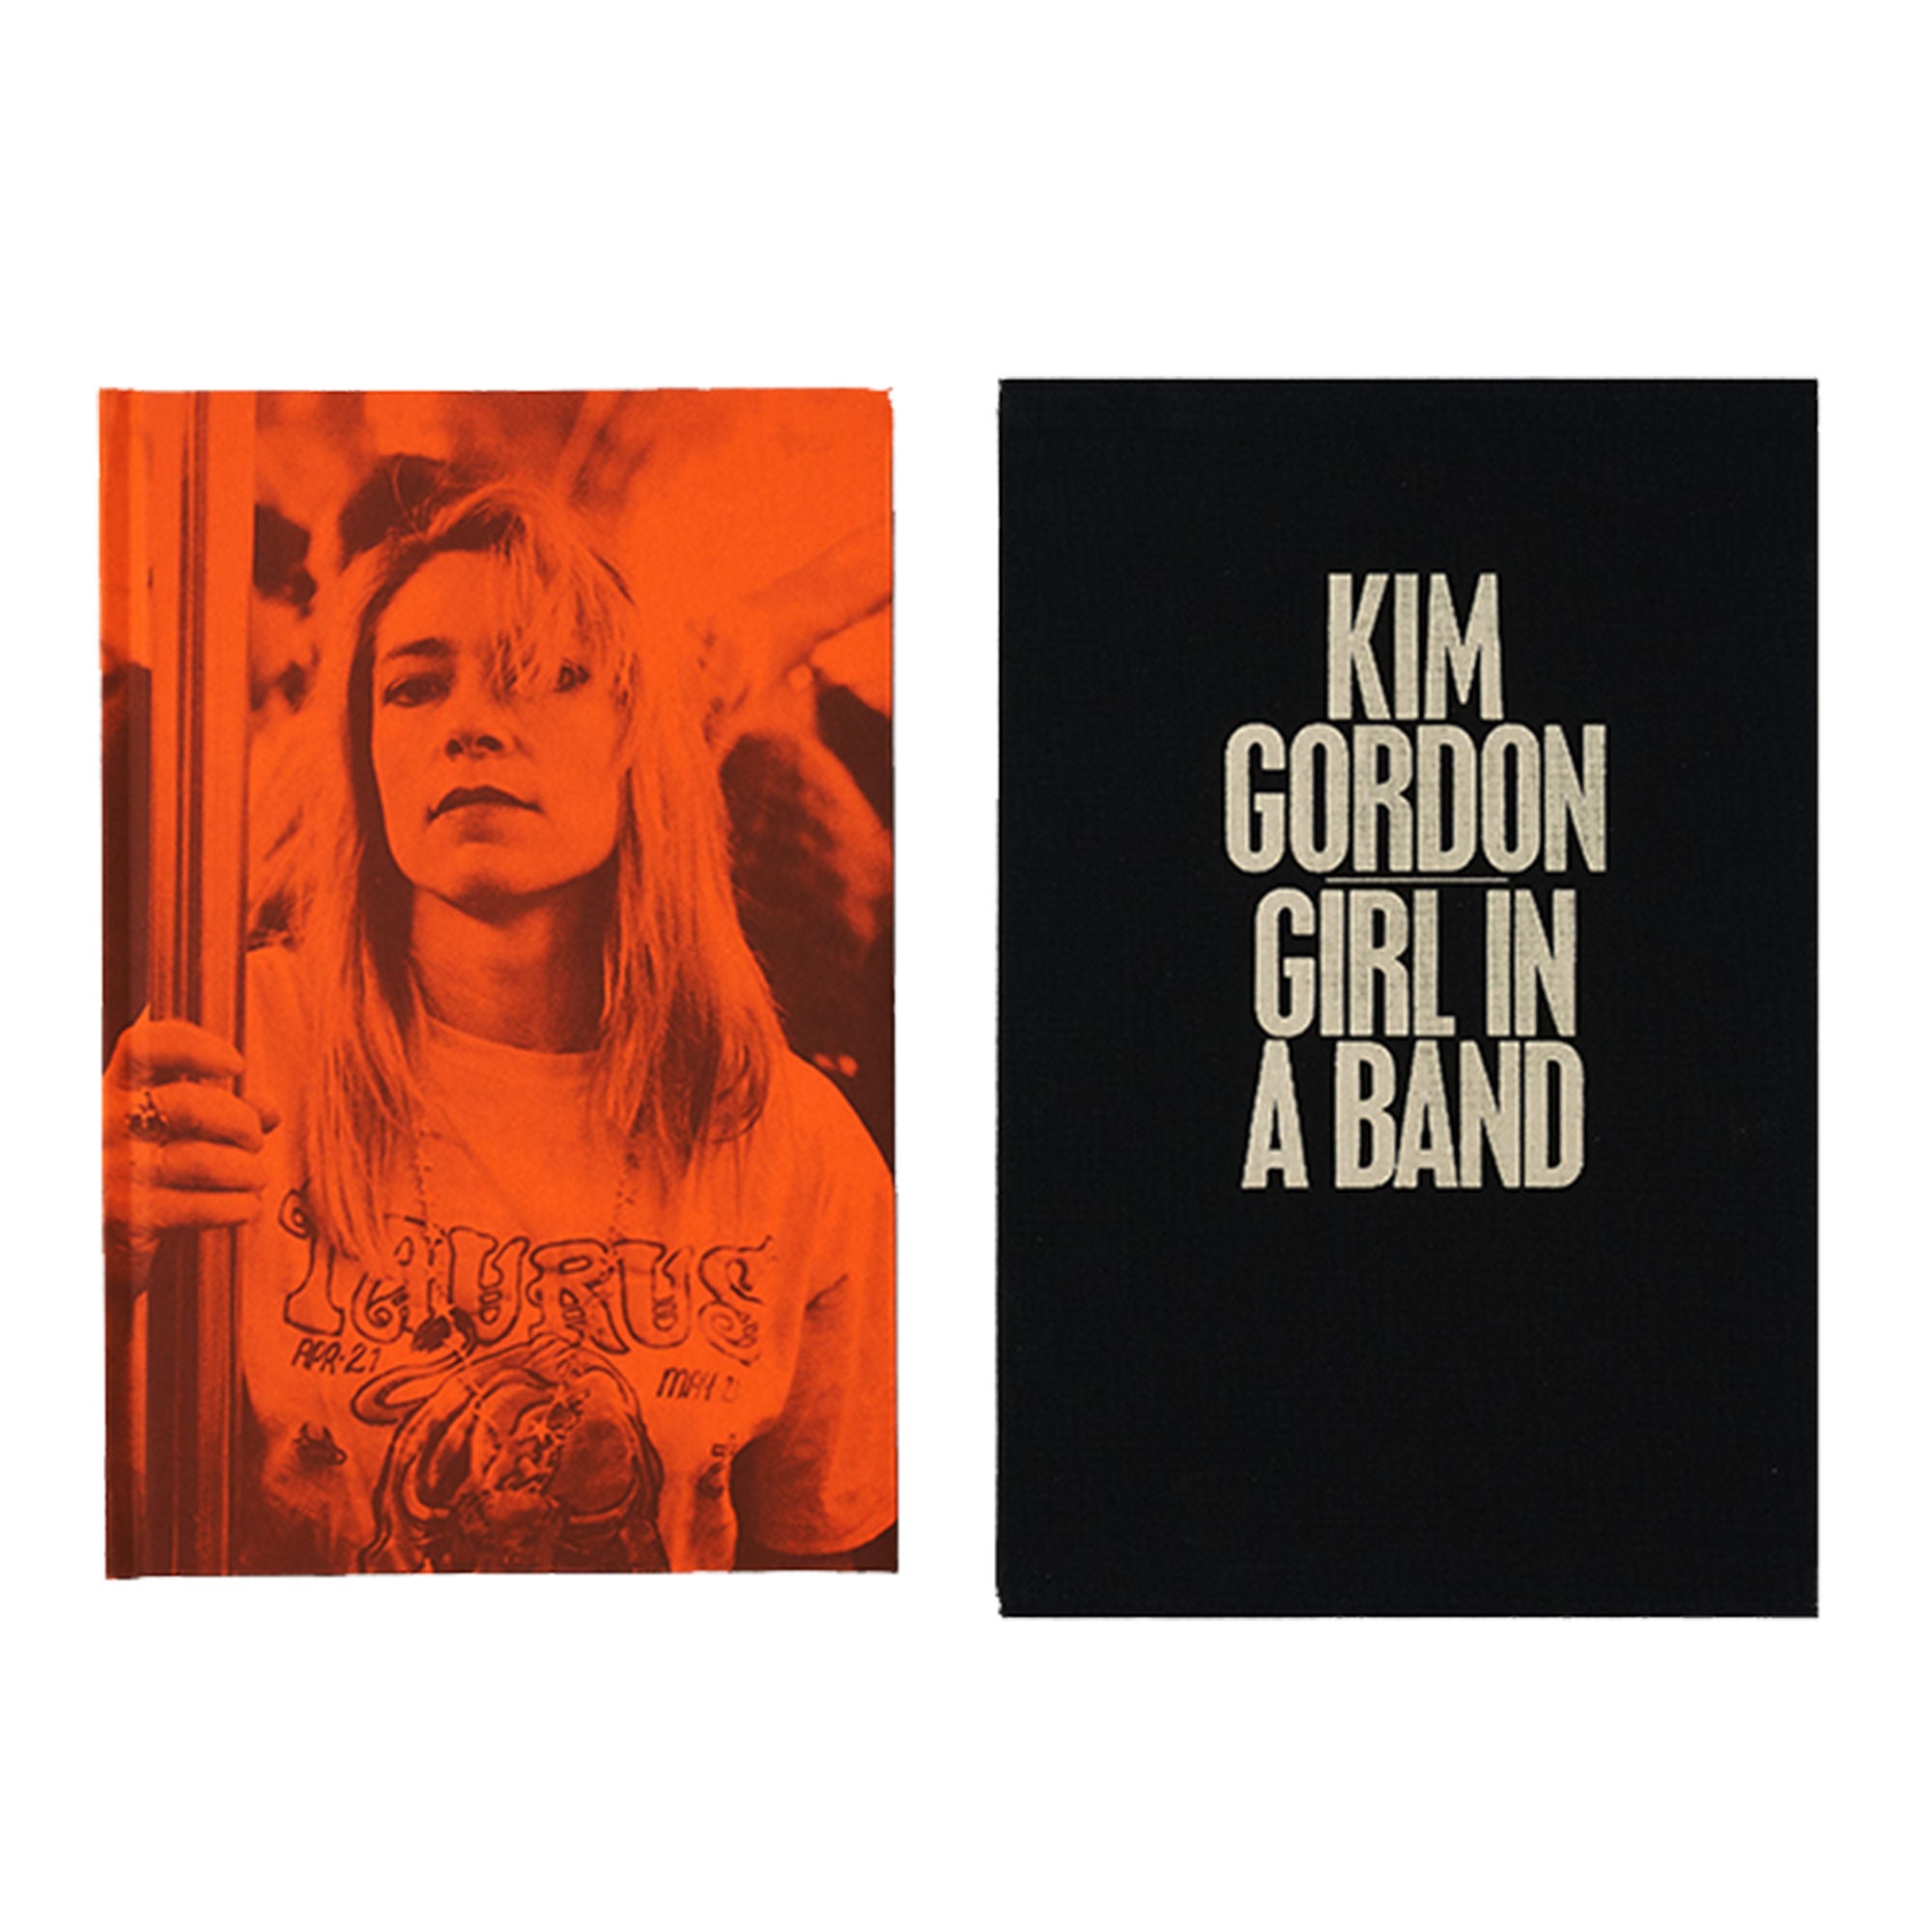 Kim Gordon - Girl in a Band: Limited Edition Book (Signed by Kim Gordon)